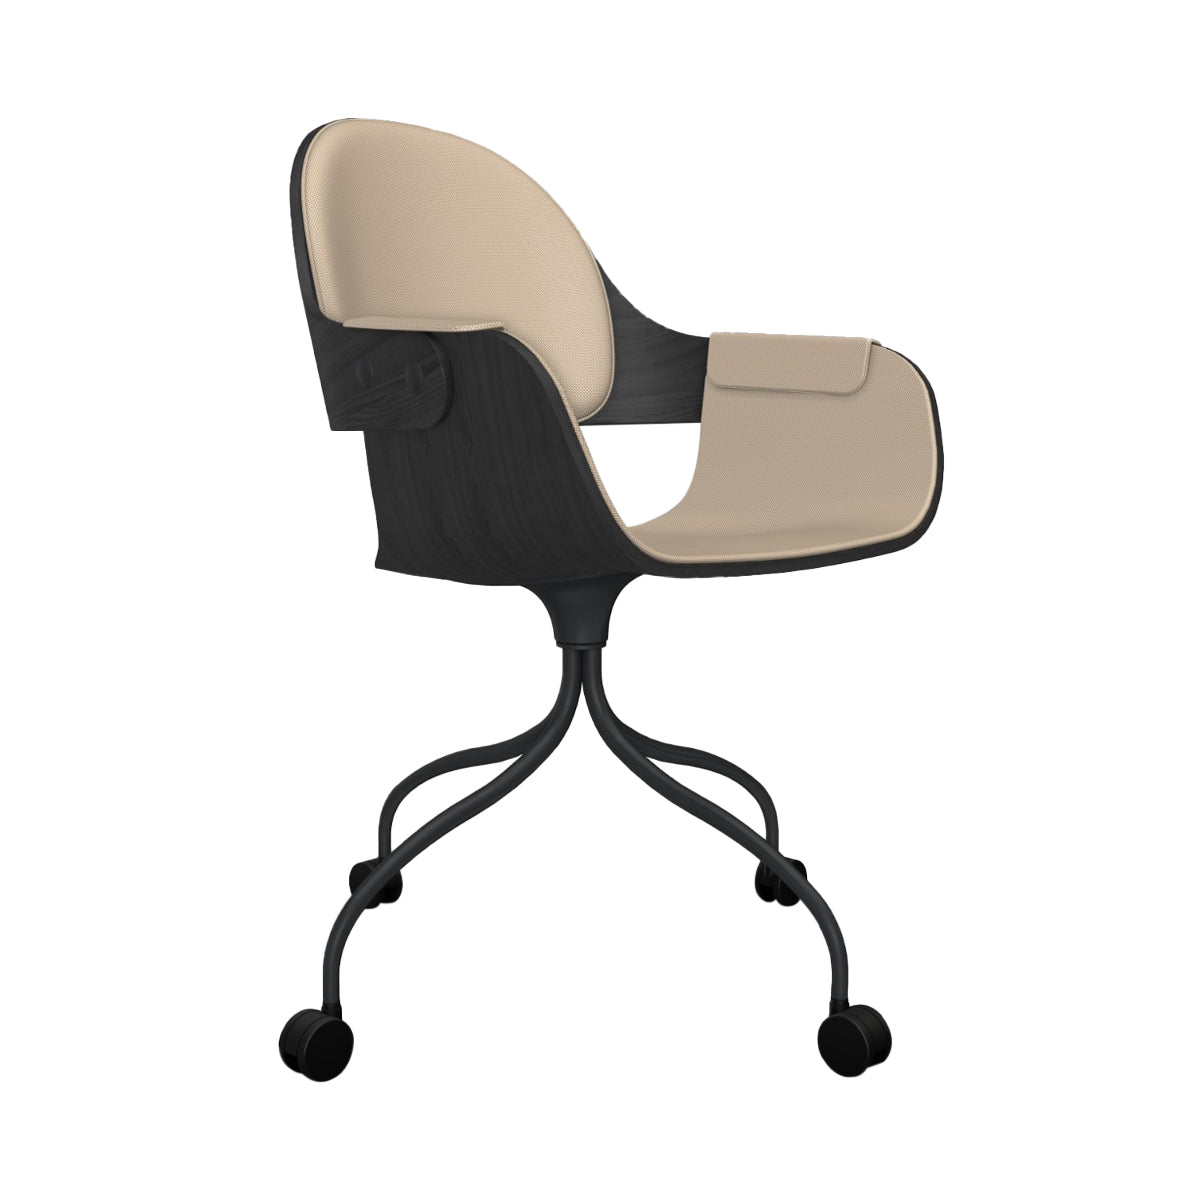 Showtime Nude Chair with Wheel: Interior Seat + Backrest Cushion + Ash Stained Black + Anthracite Grey